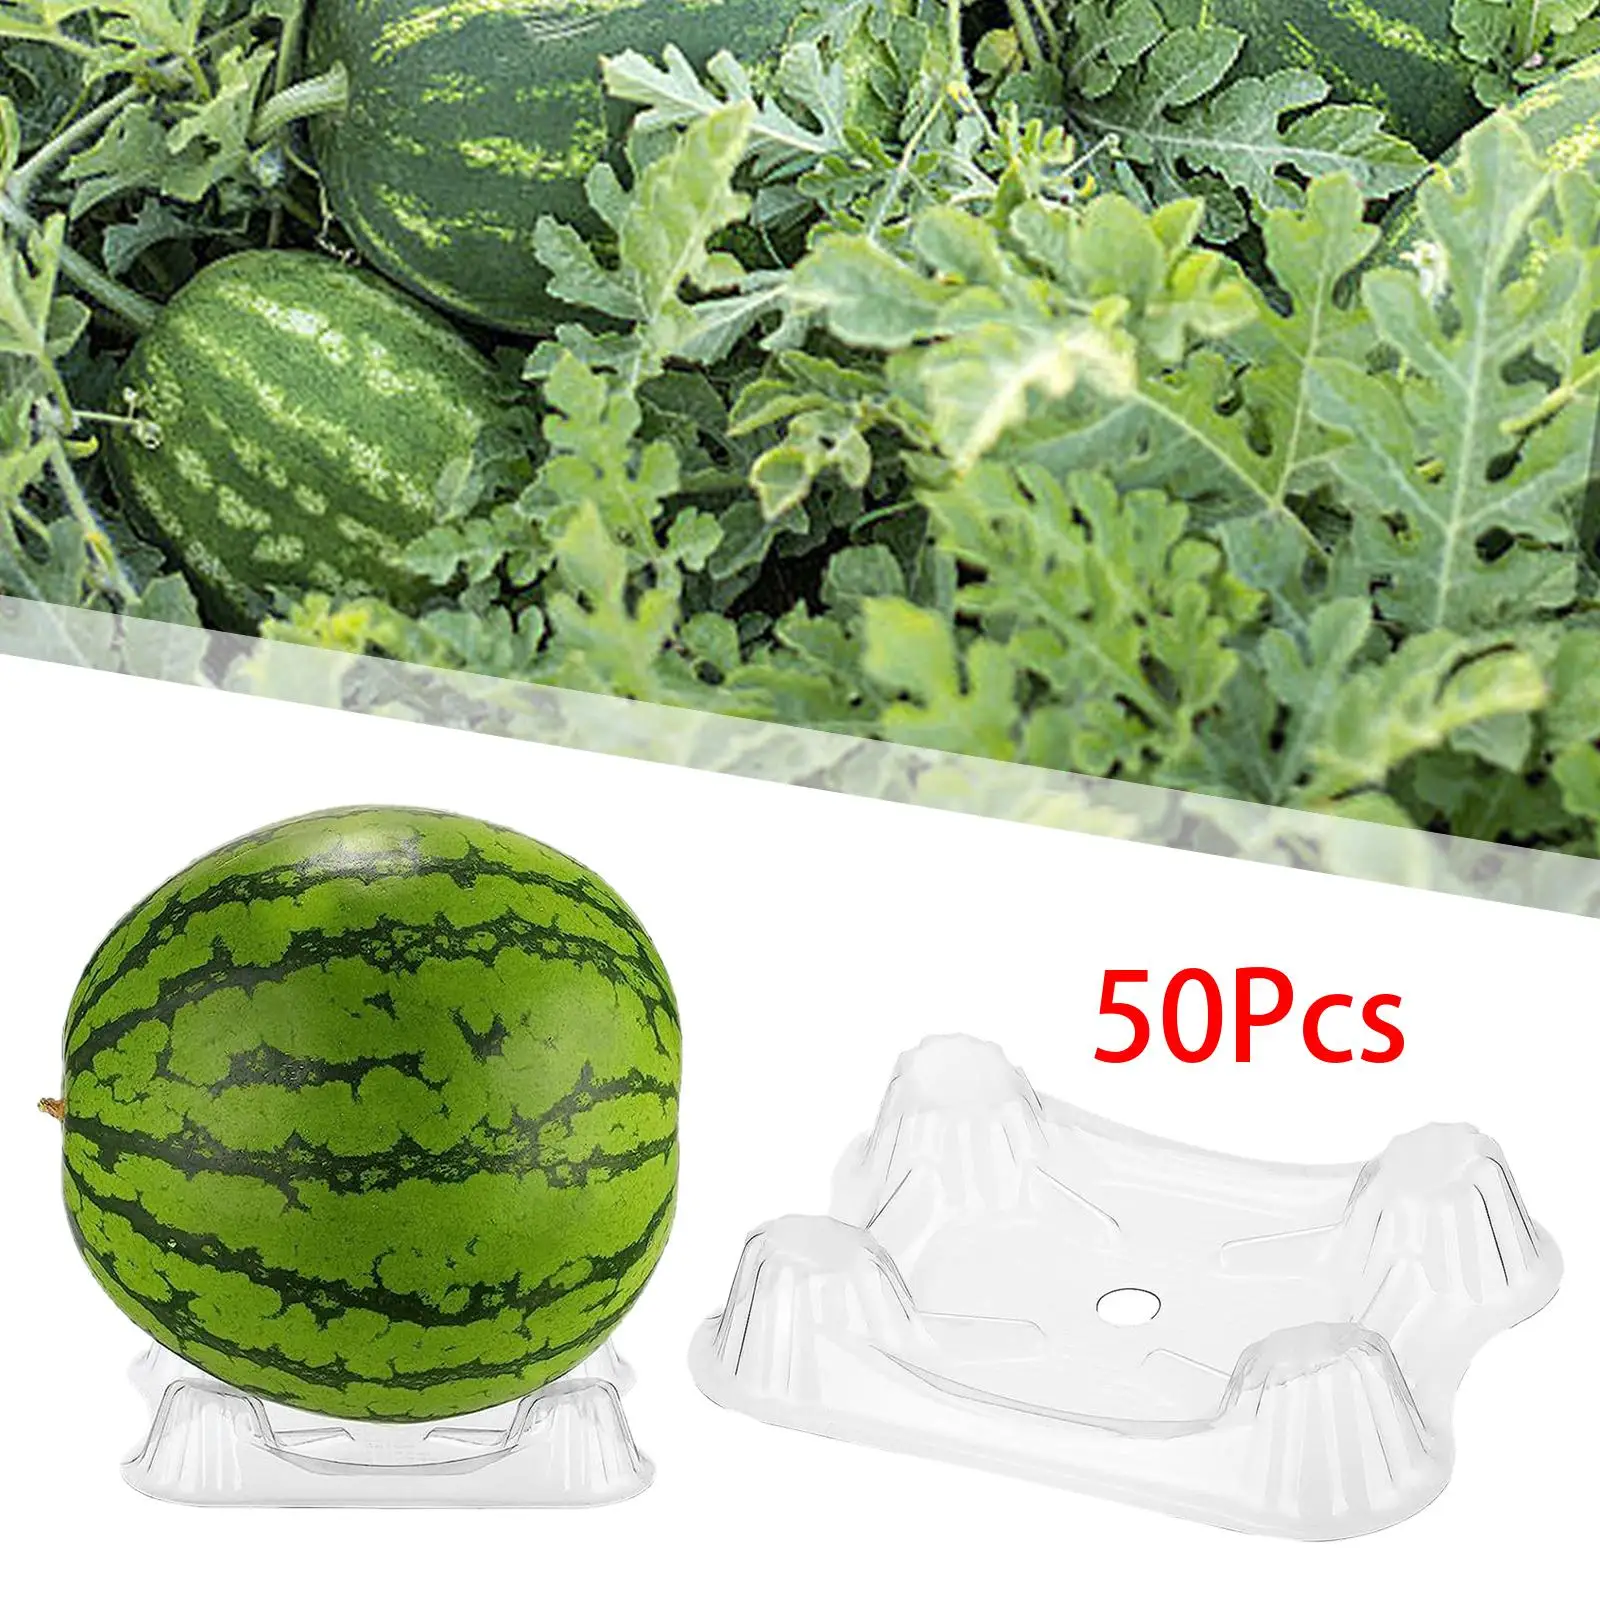 50x Melon Support Cradle Holds up to 20 kg Watermelon Holder Watermelon Support Stand for Watermelon Strawberry Cantaloupe Accs